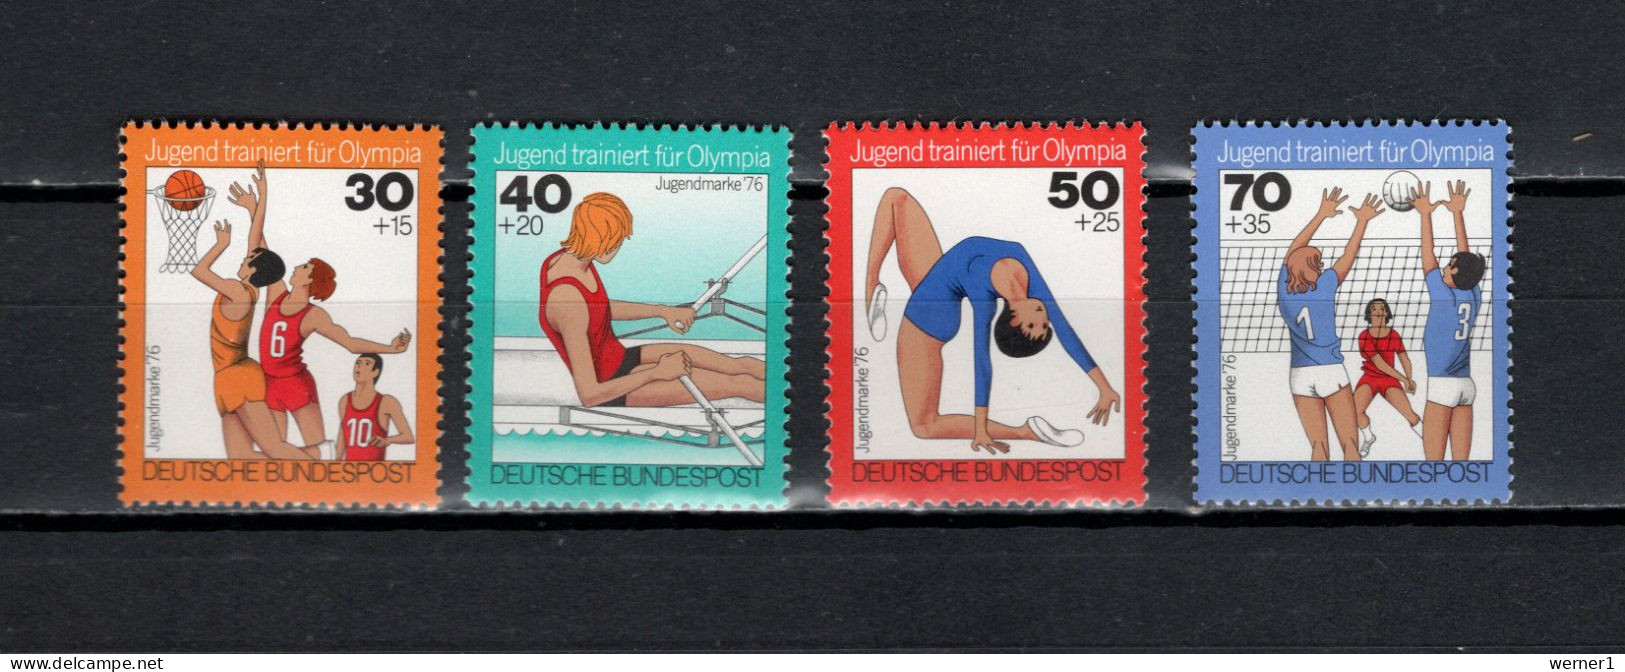 Germany 1976 Olympic Games, Sport, Basketball, Rowing, Gymnastics, Volleyball Set Of 4 MNH - Ete 1976: Montréal